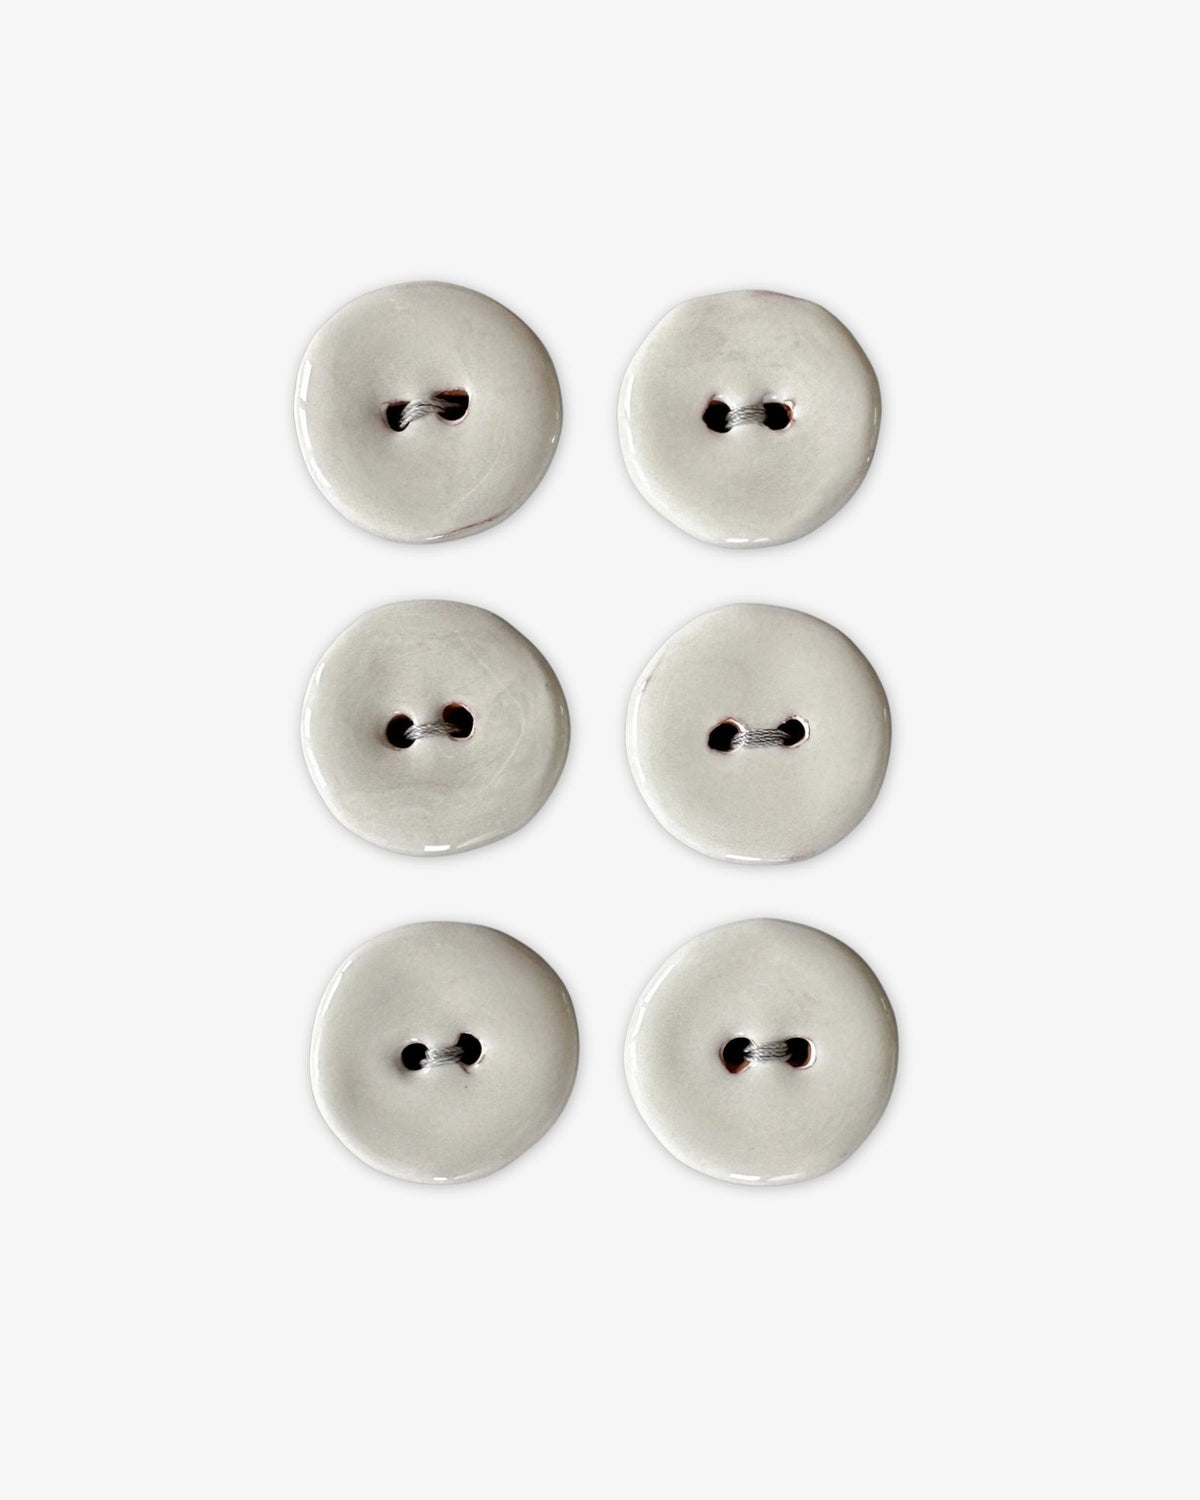 Large Ceramic Buttons by Studio Carta | Tolemaide